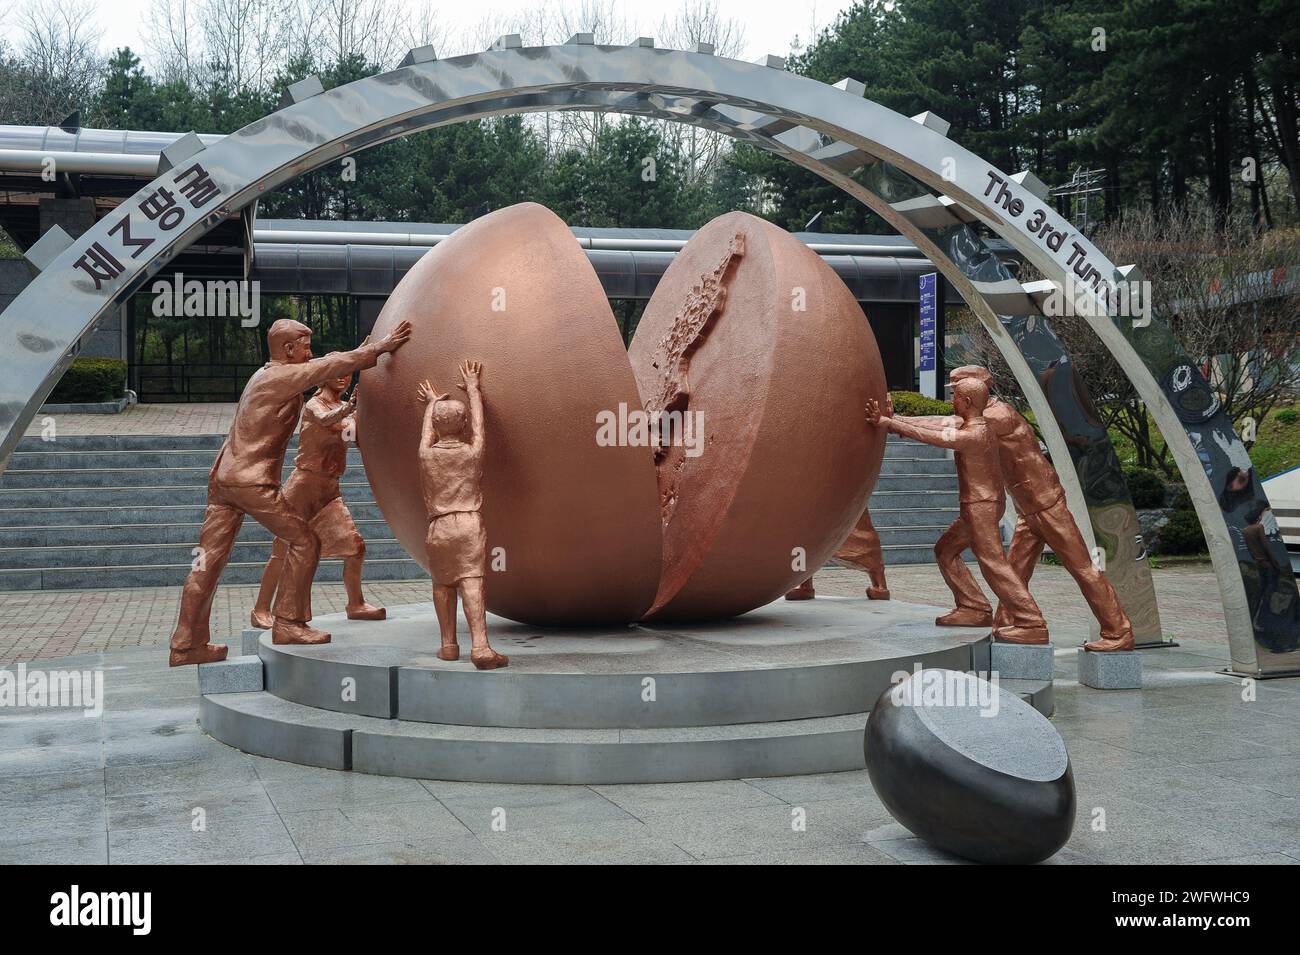 02.05.2013, Panmunjom, Gyeonggi Province, Korea, Asia - Unification sculpture at the Third Tunnel of Aggression within the Demilitarised Zone (DMZ). Stock Photo